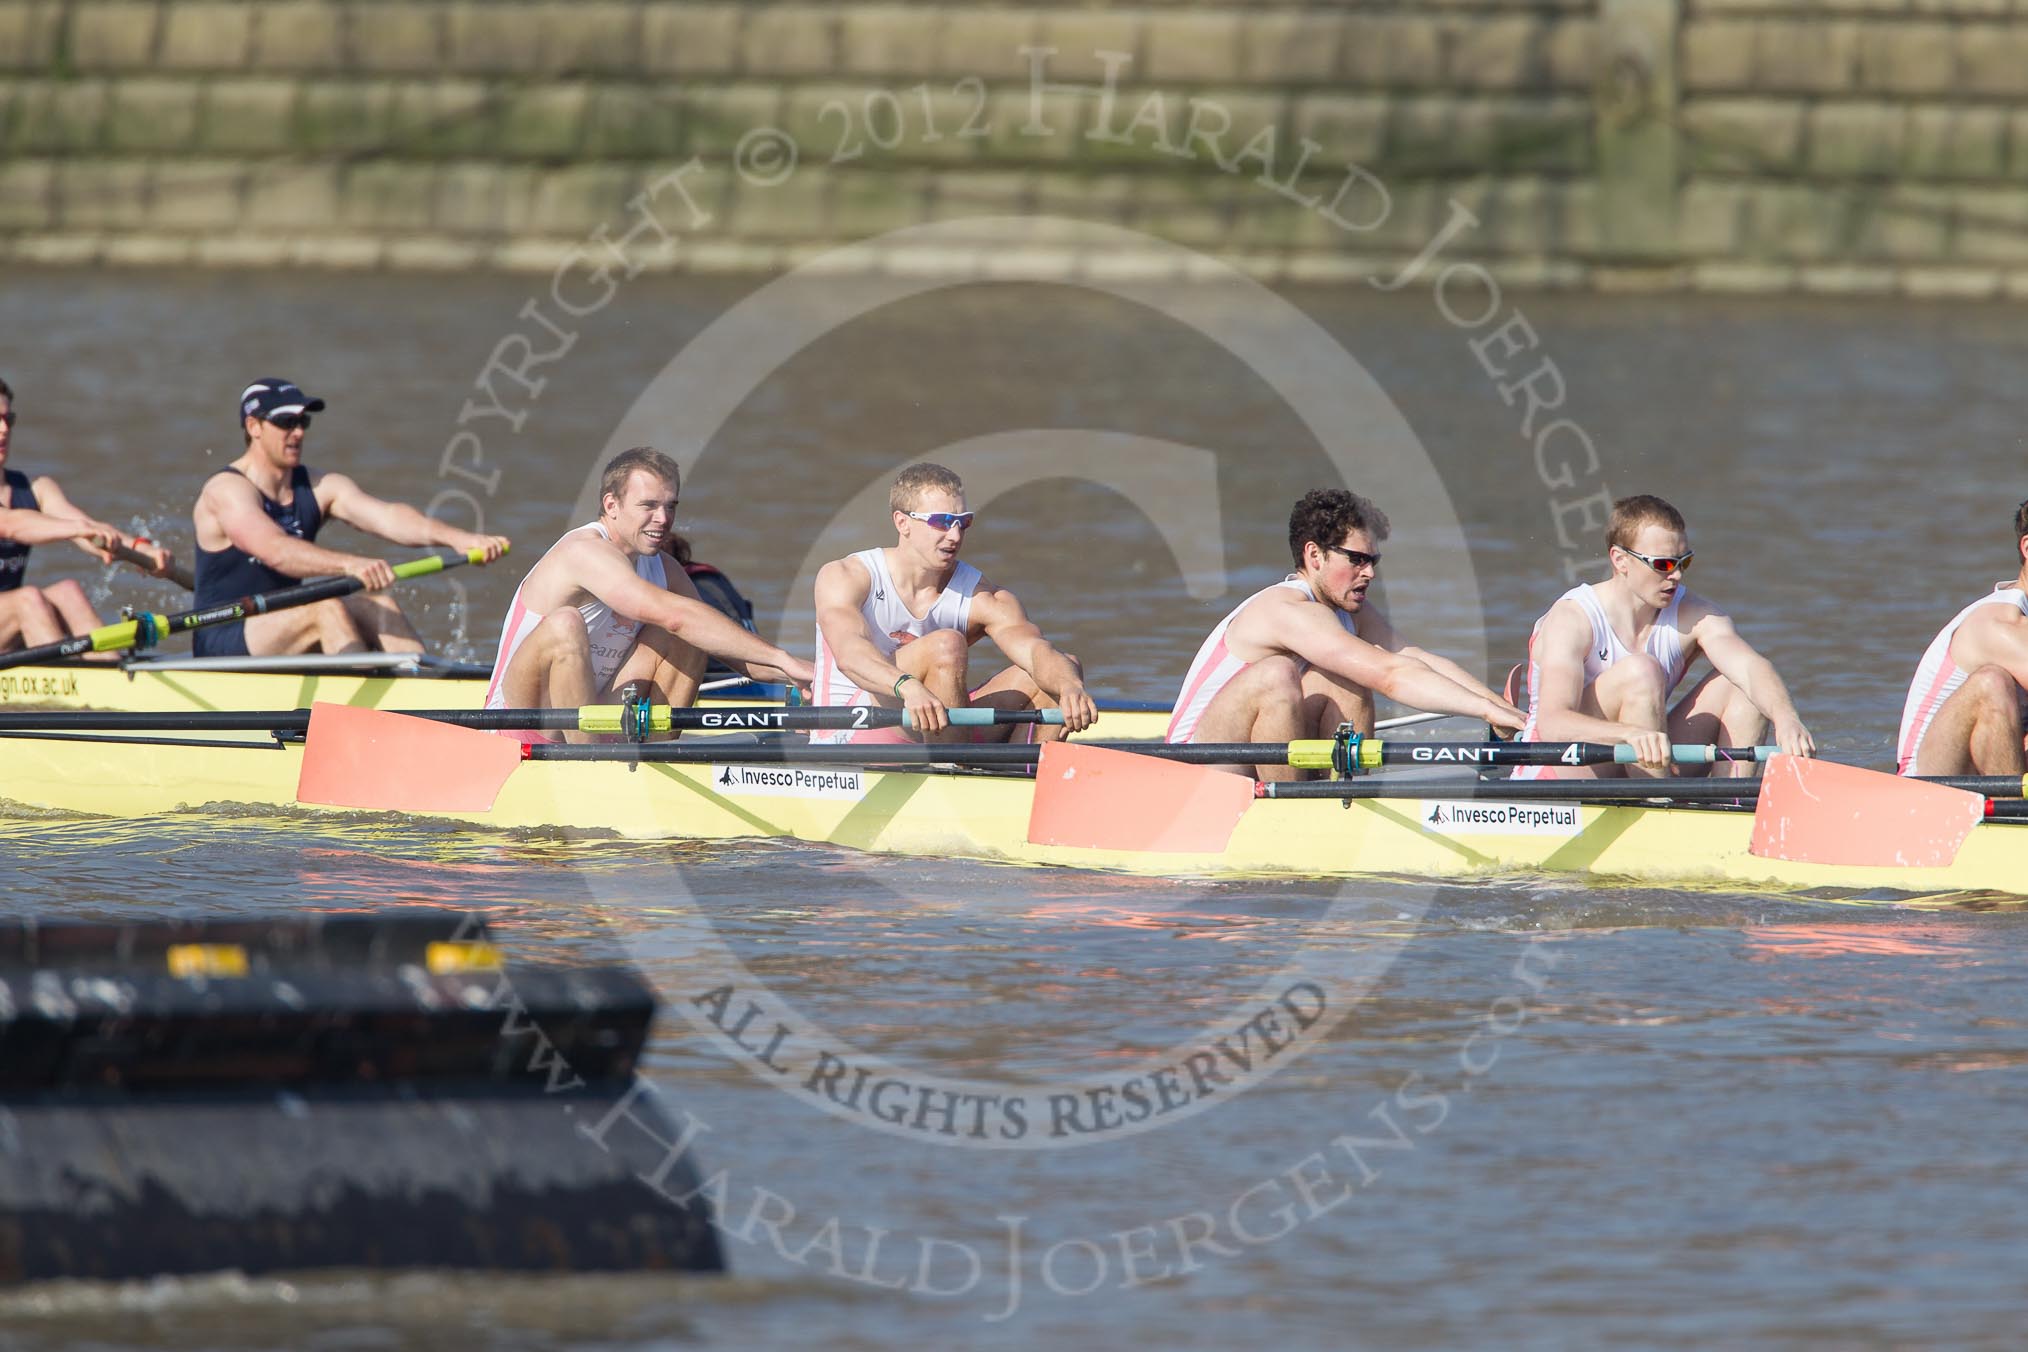 The Boat Race season 2012 - fixture OUBC vs Leander: Behind in the photo but leading the race - OUBC's Blue Boat, Dan Harvey, stroke Roel Haen, cox Zoe de Toledo, in front Leander with bow Nathan Hillyer, Chris Friend, Will Gray, Sam Whittaker, and Tom Clark..




on 24 March 2012 at 14:29, image #117